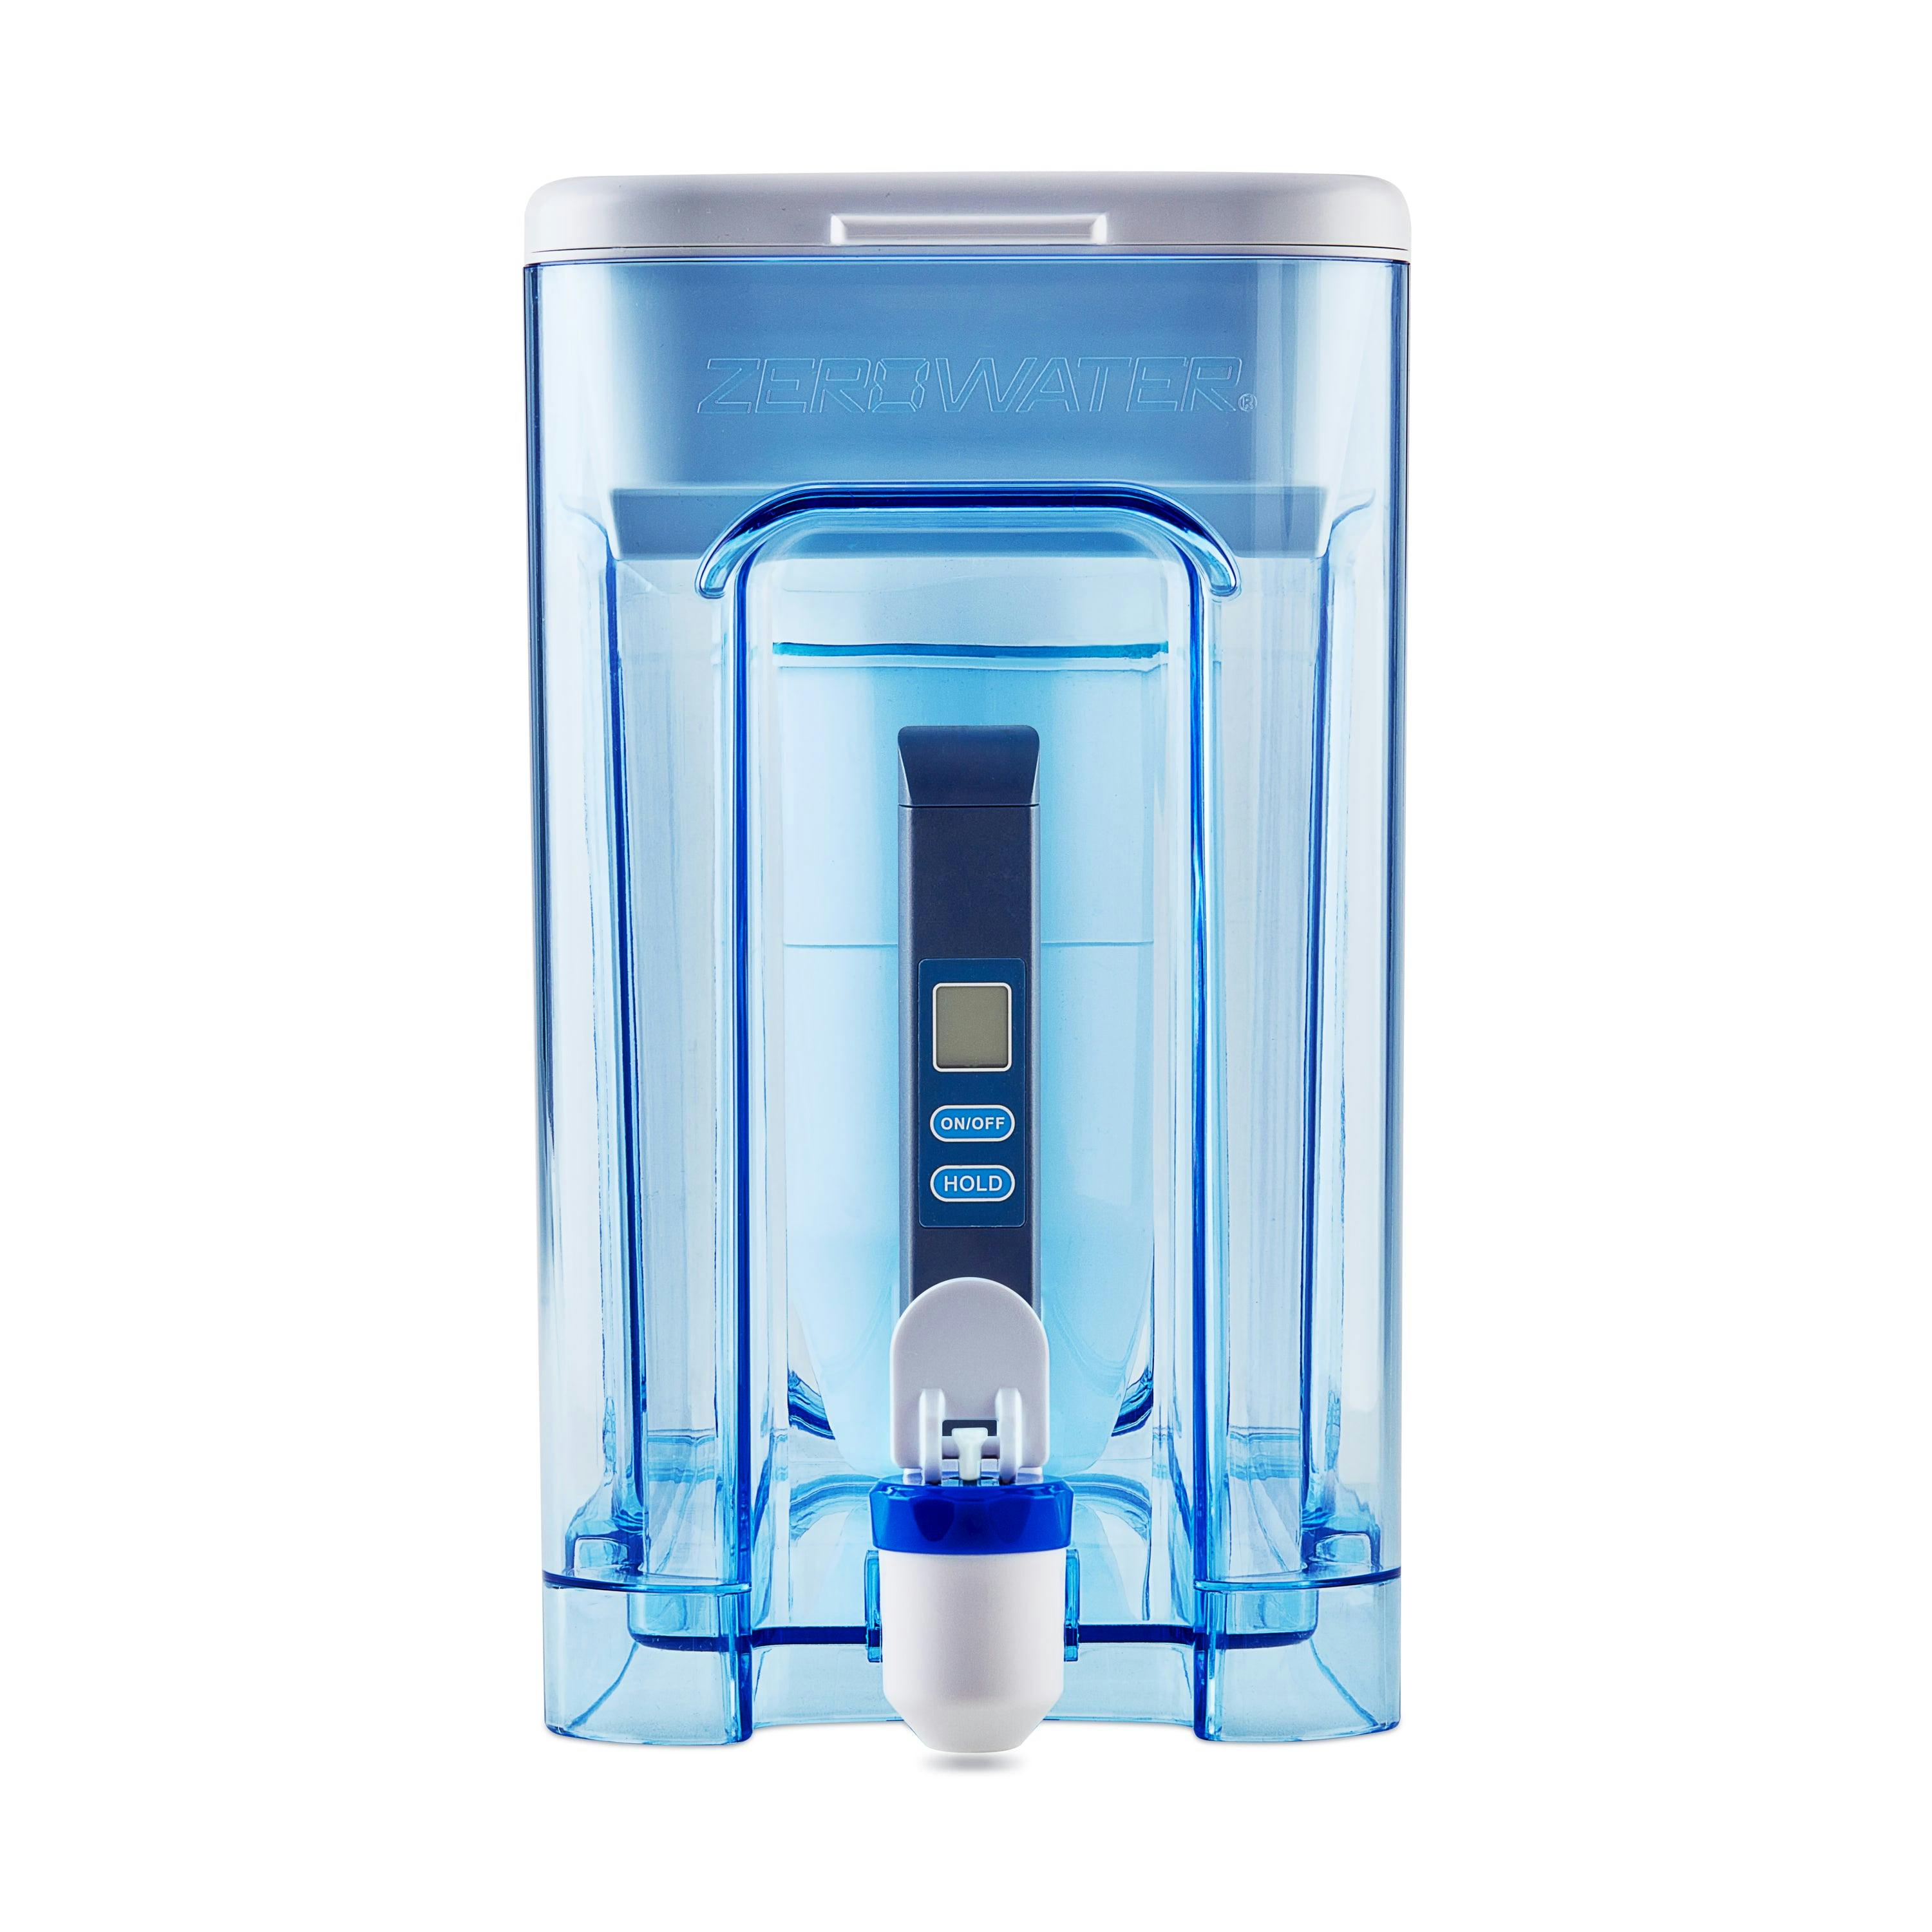 32 cup ready read dispenser front with tds meter and spigot